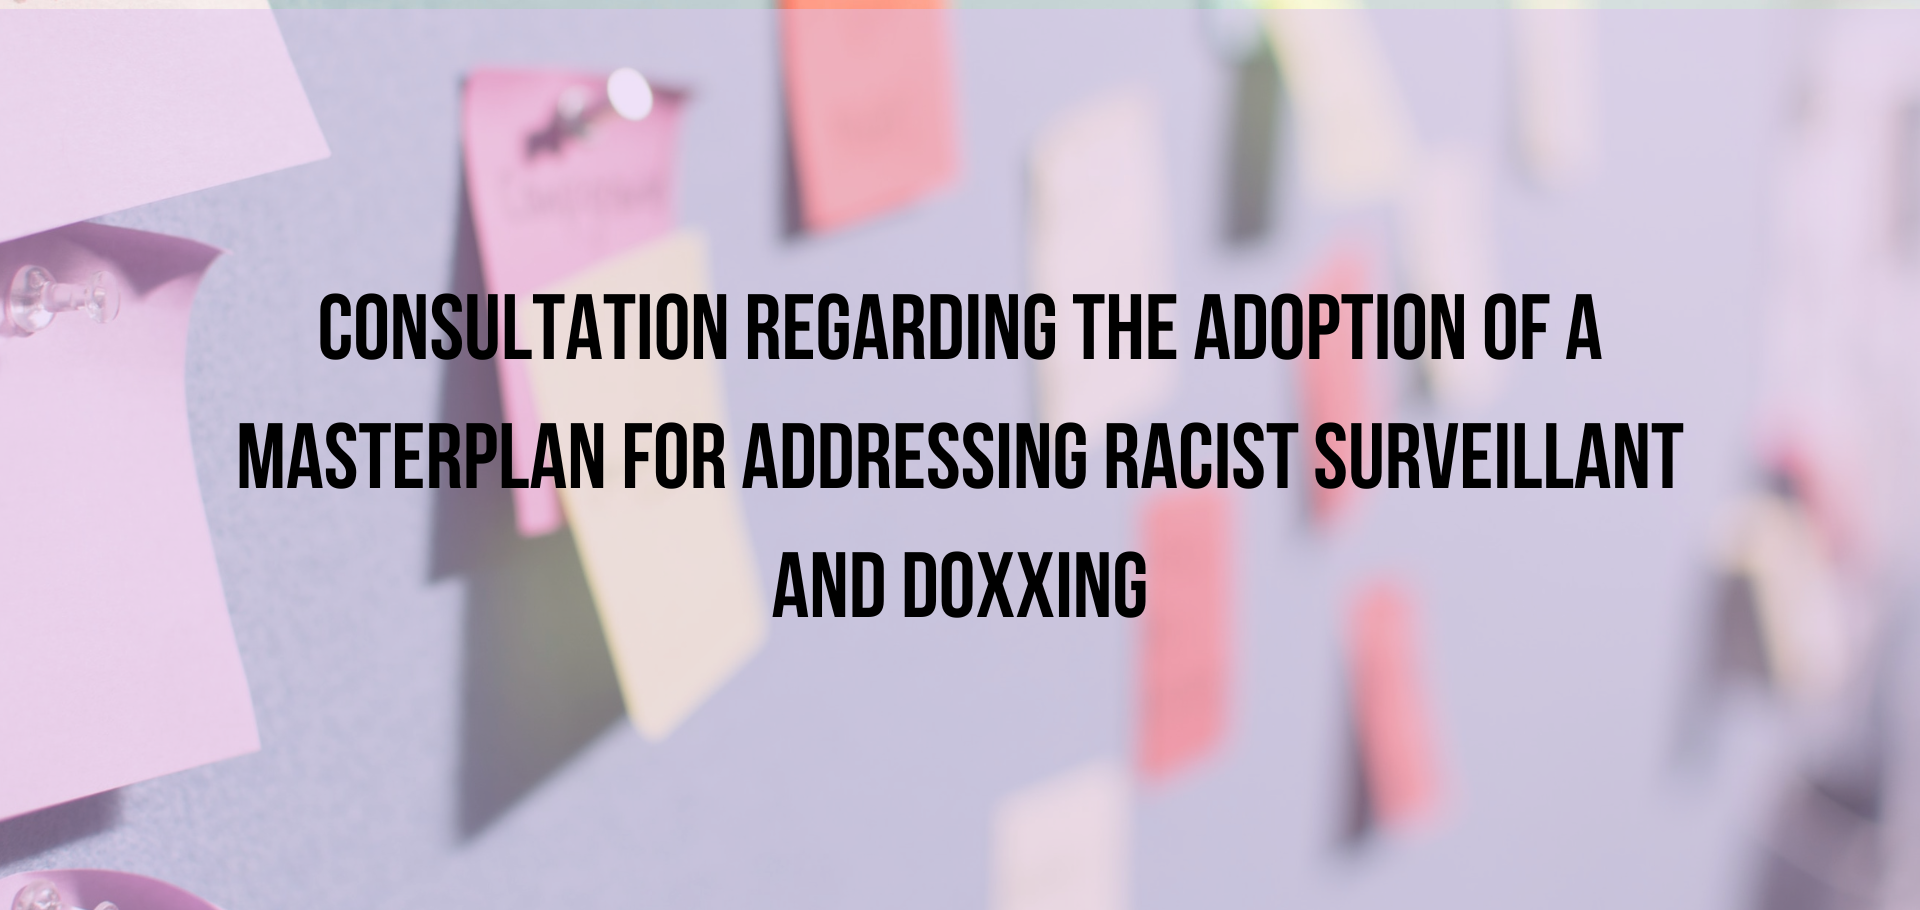 CONSULTATION REGARDING THE ADOPTION OF A MASTERPLAN FOR ADDRESSING RACIST SURVEILLANT AND DOXXING